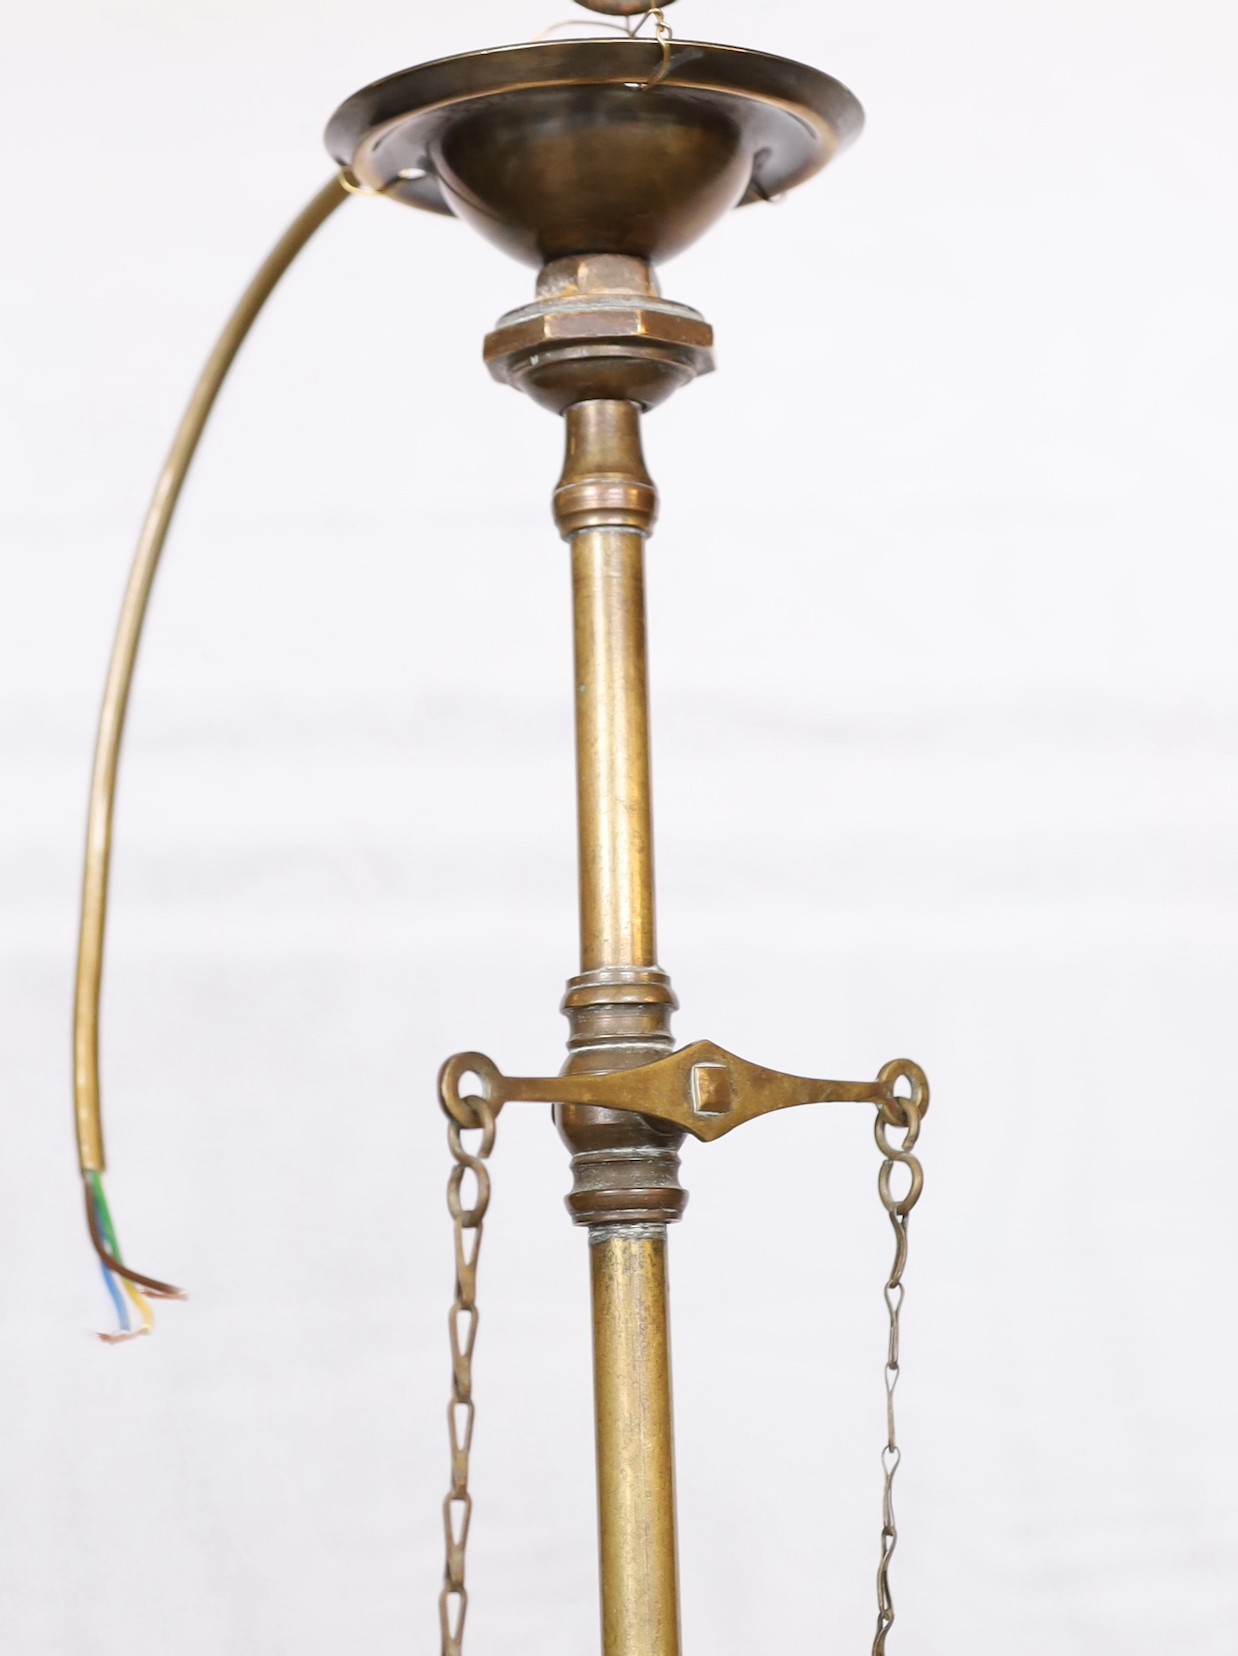 An early 20th century English brass gasolier light fitting, converted to electricity, with pink tinted etched glass shade, height 50cm